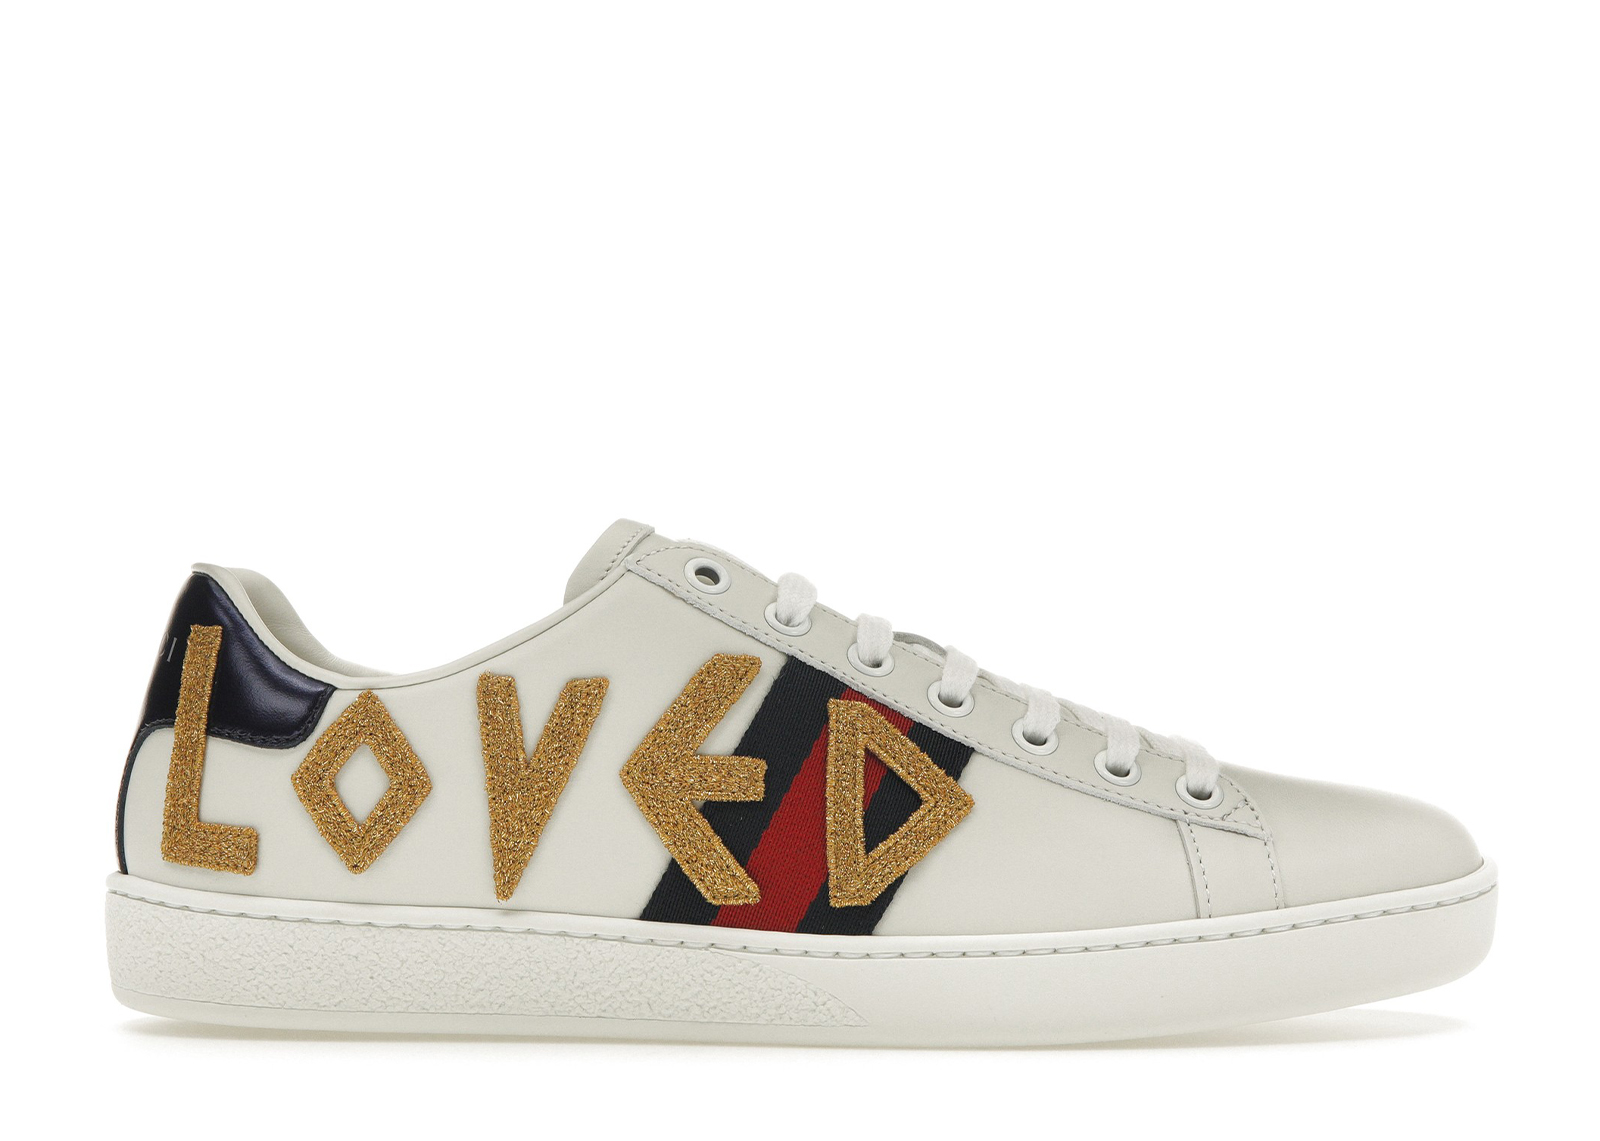 Gucci Ace Embroidered Love (Women's)